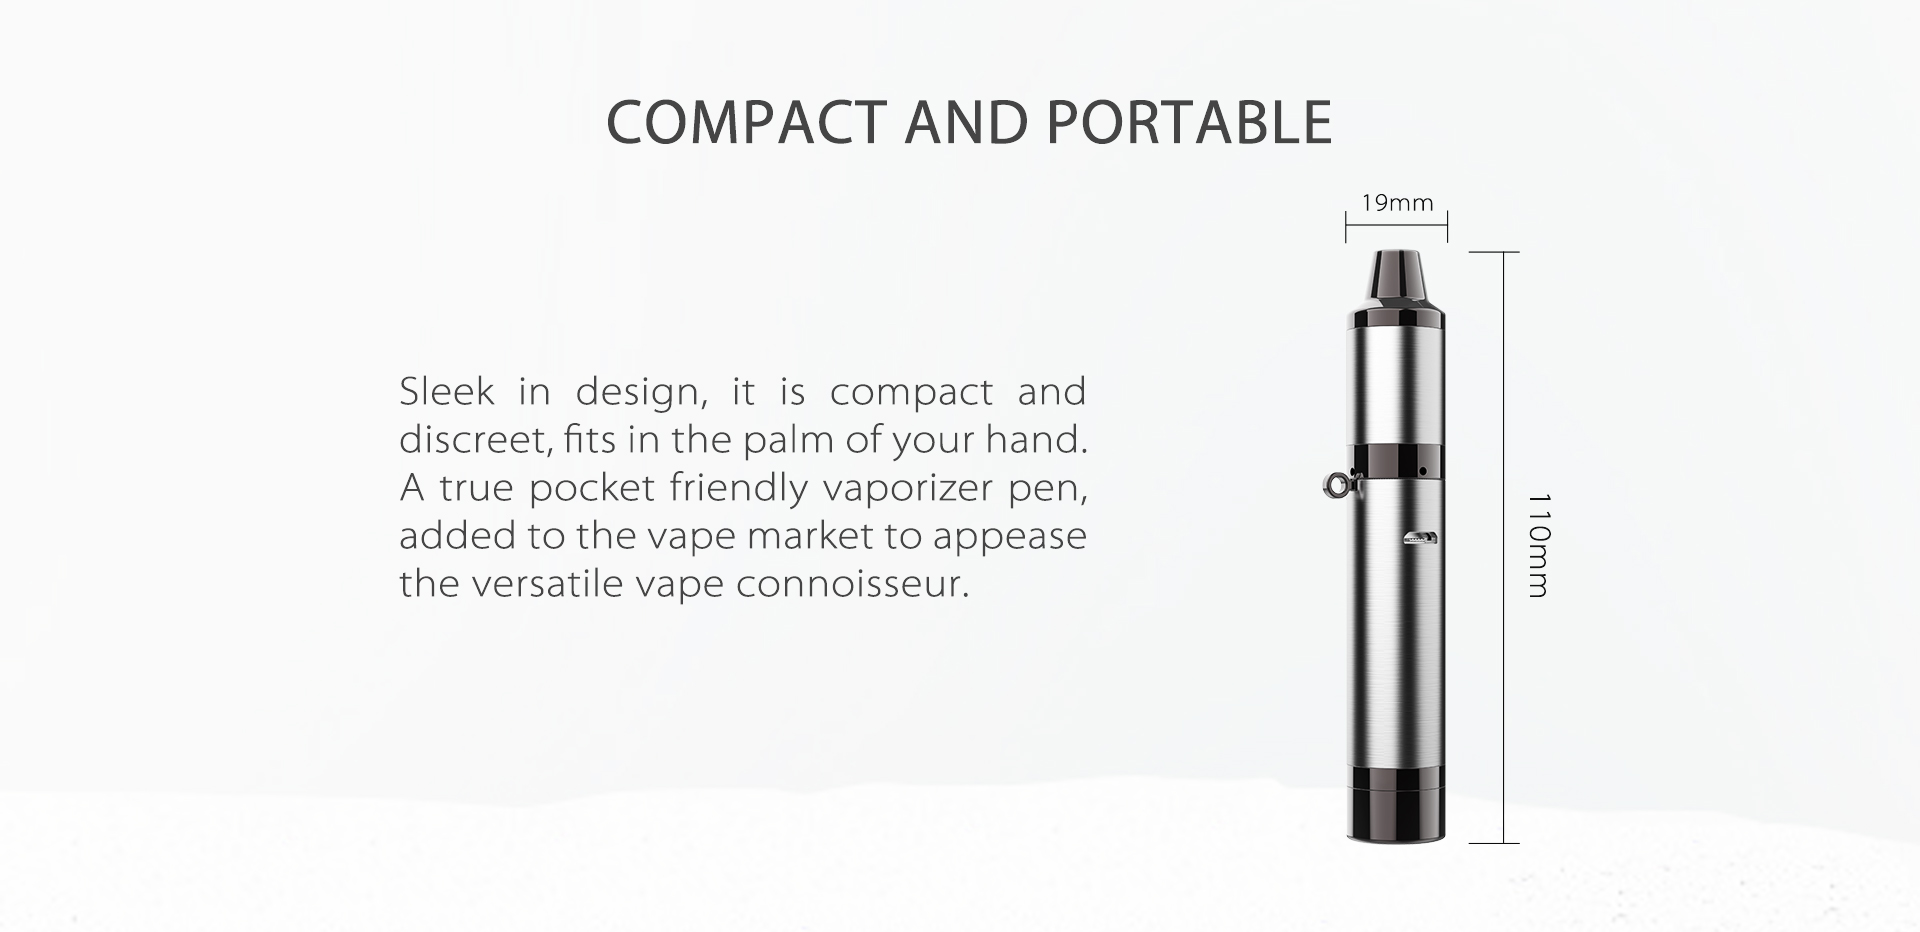 Yocan Regen vaporizer pen is compact and discreet, fits in the palm of your hand.